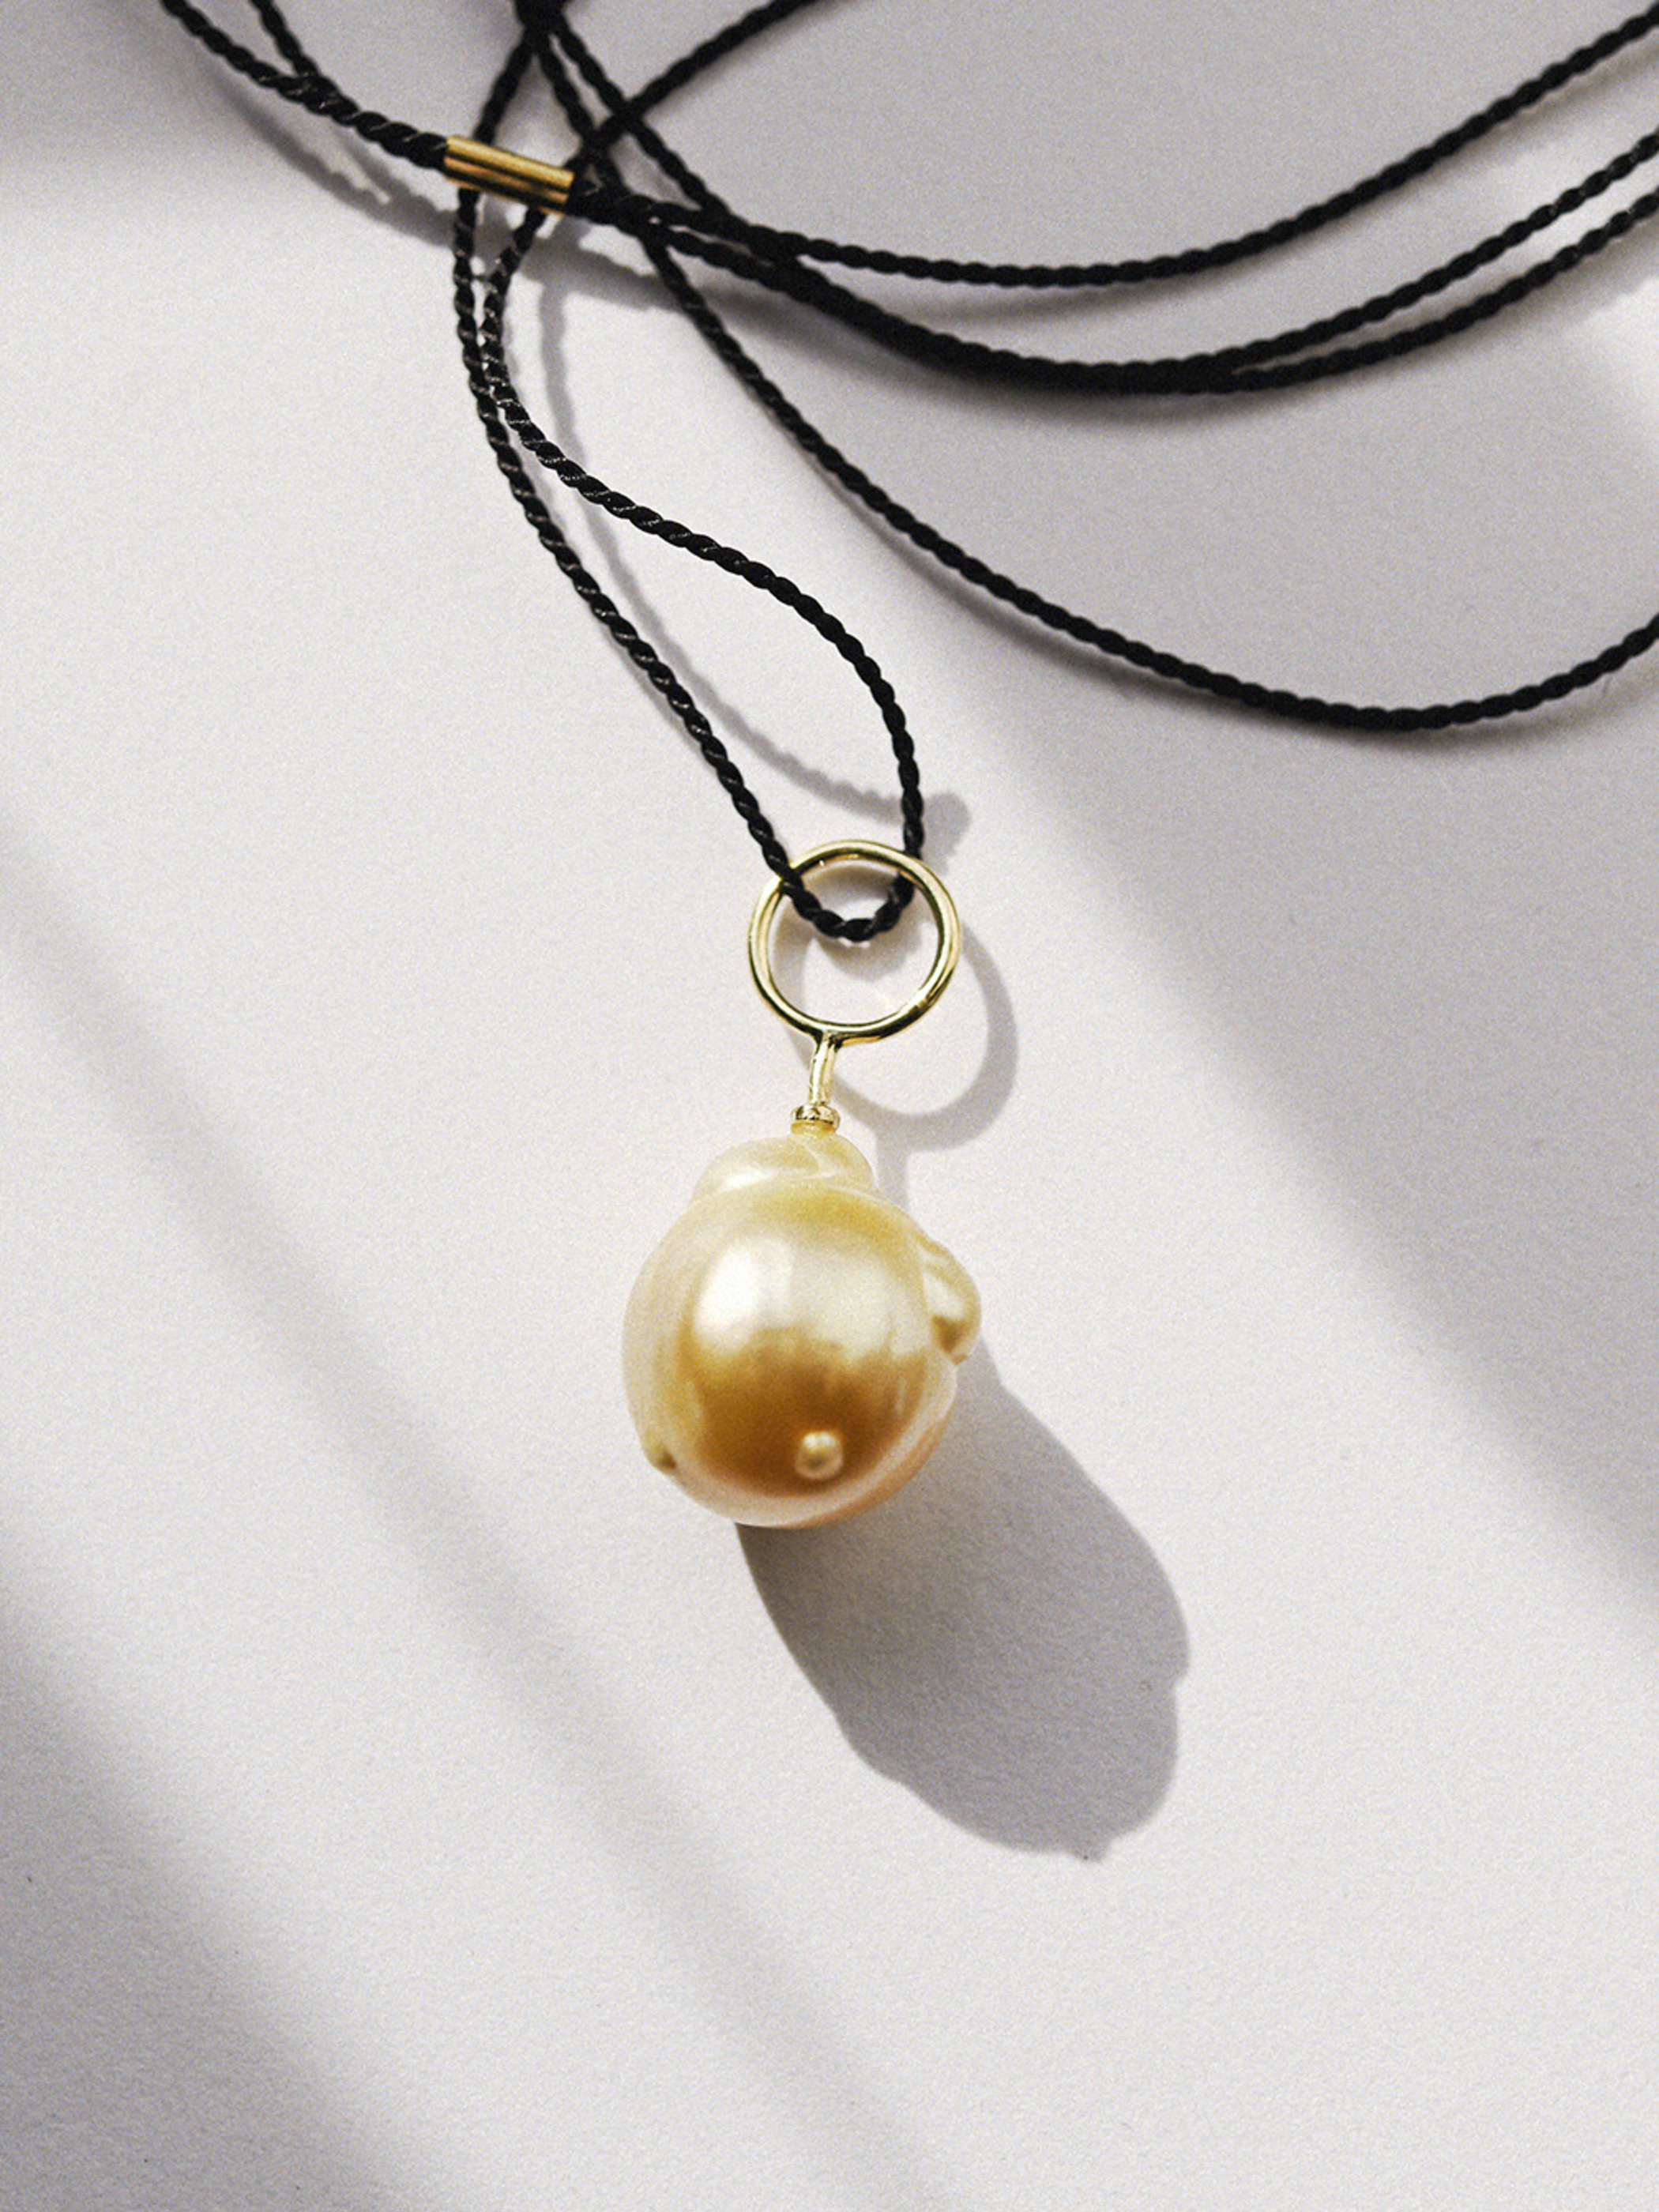 Baroque pearl バロックパール ネックレス